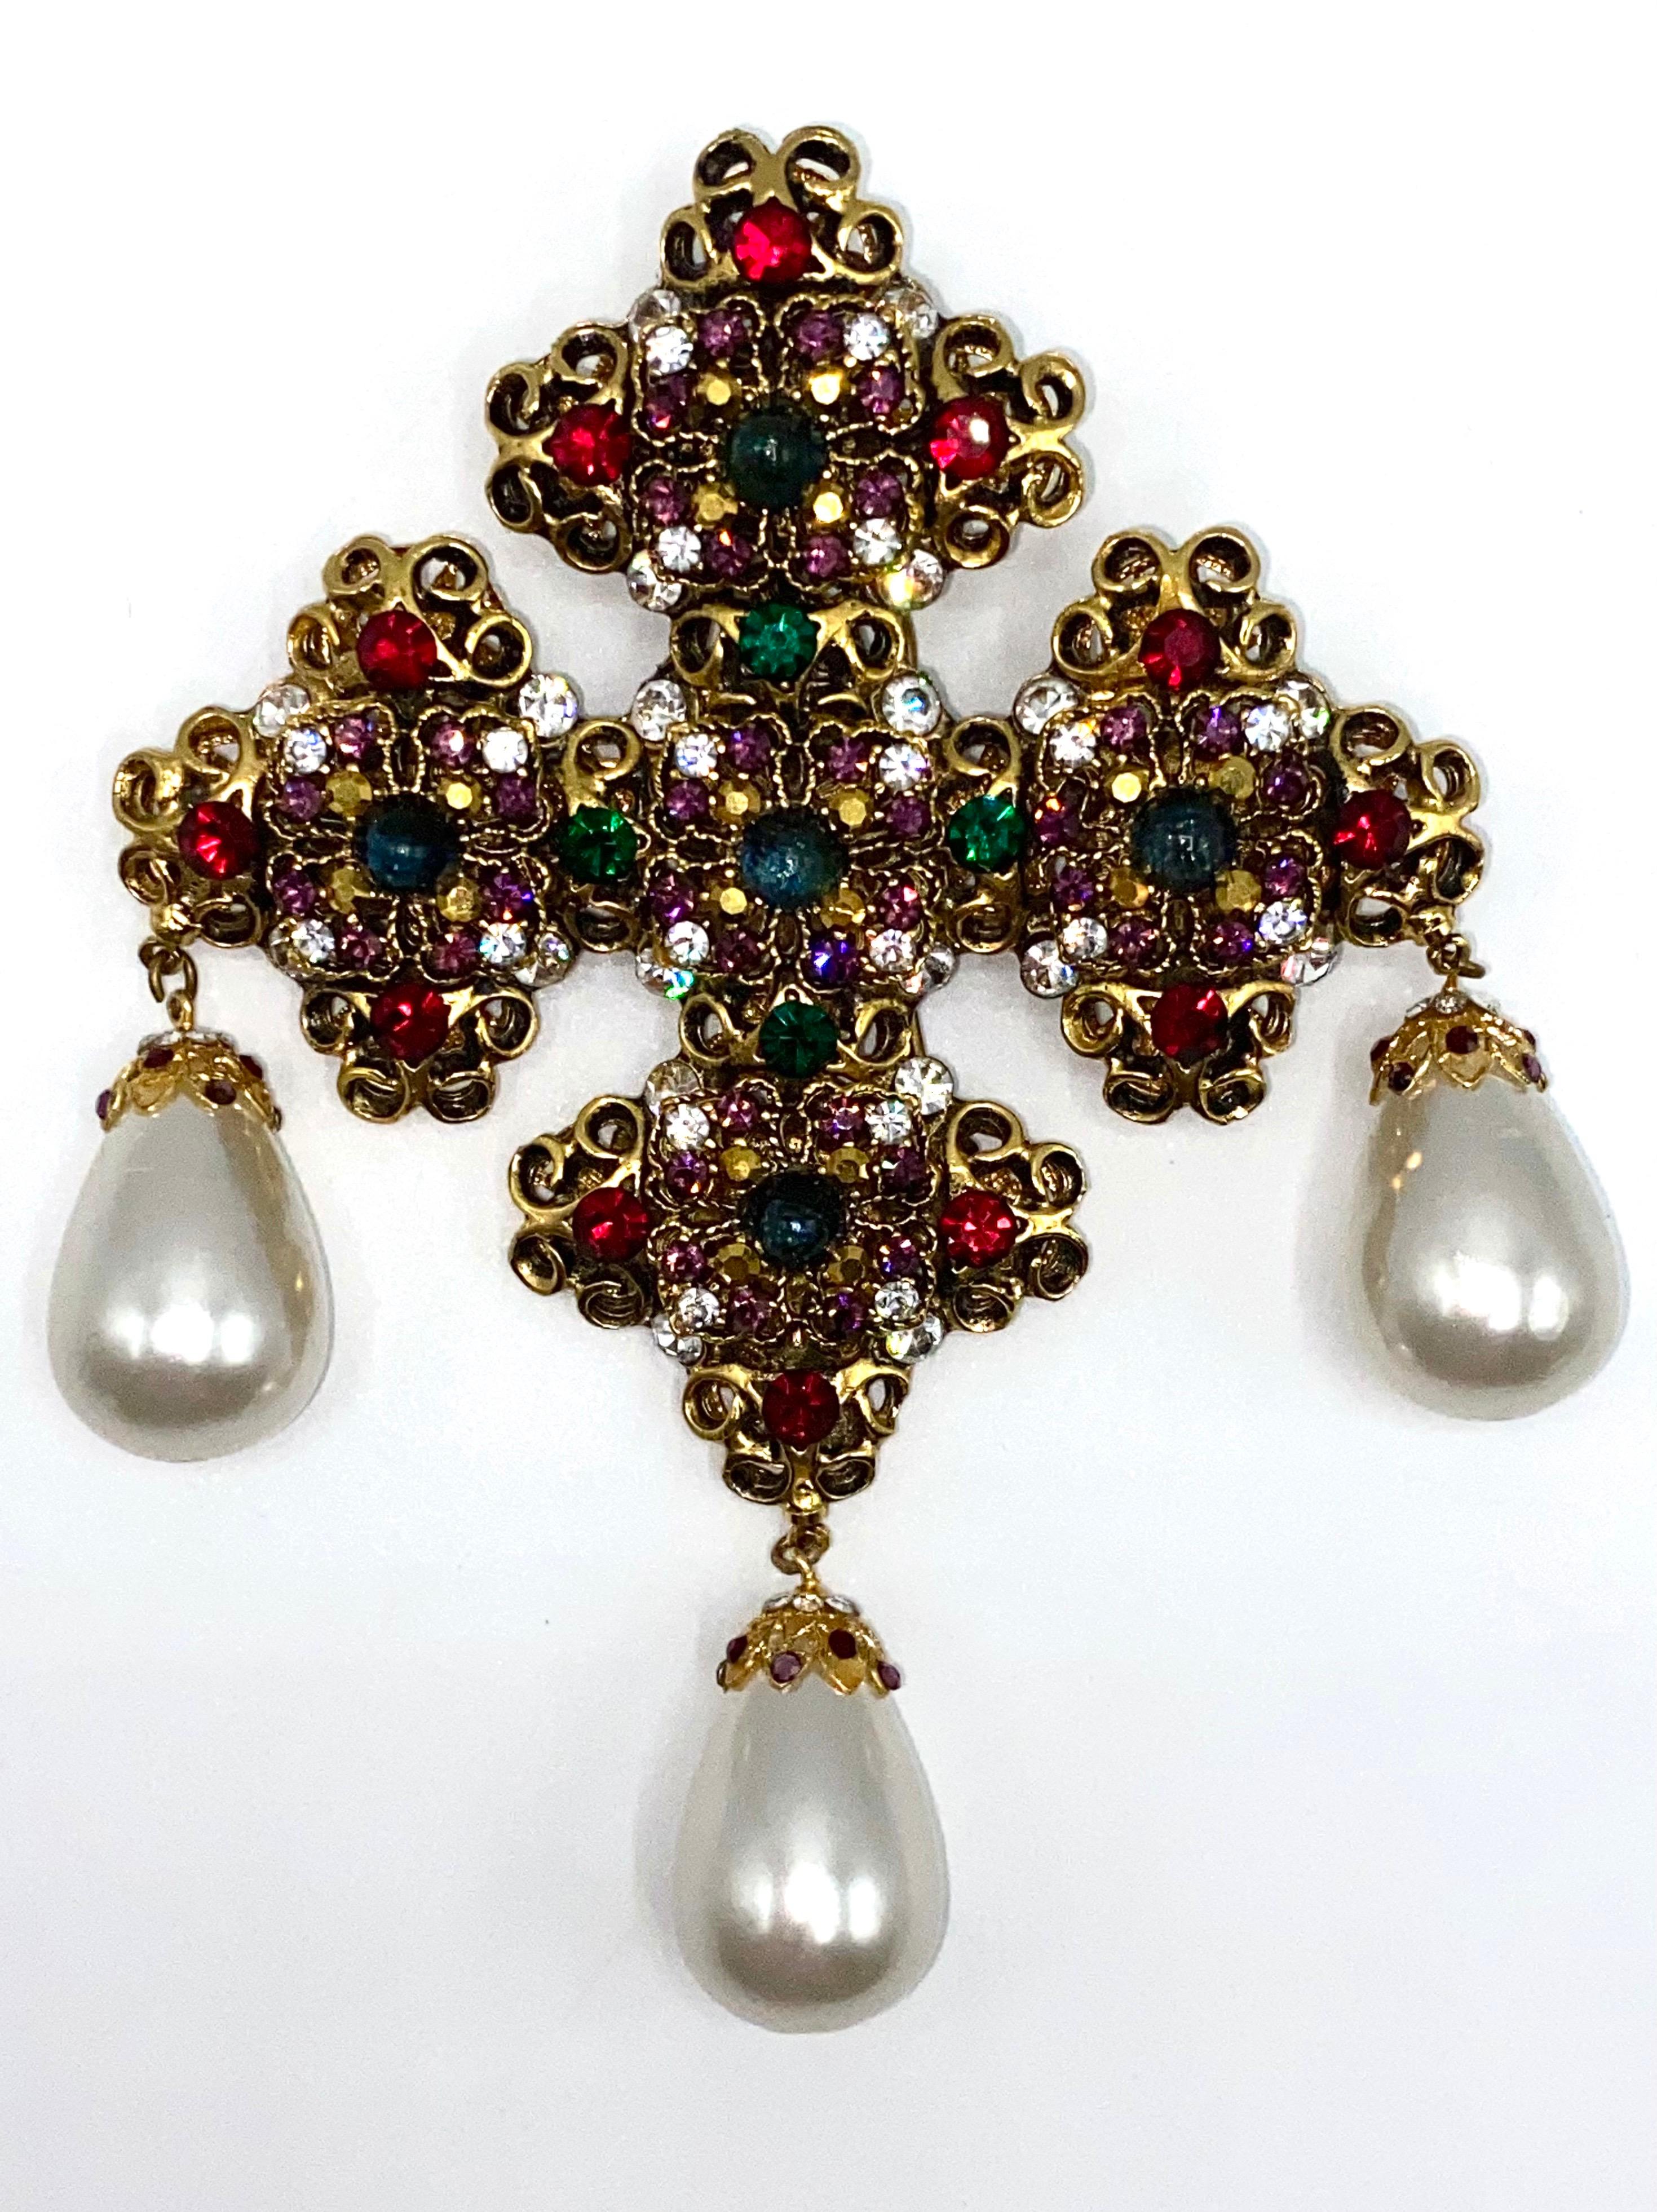 A rare and stunningly beautiful and regal heraldic Renaissance style cross brooch from the 1980s by American fashion jewelry designers Jose & Maria Barrera. The The body of the cross is made of gold plate openwork medallions and filled with an amber